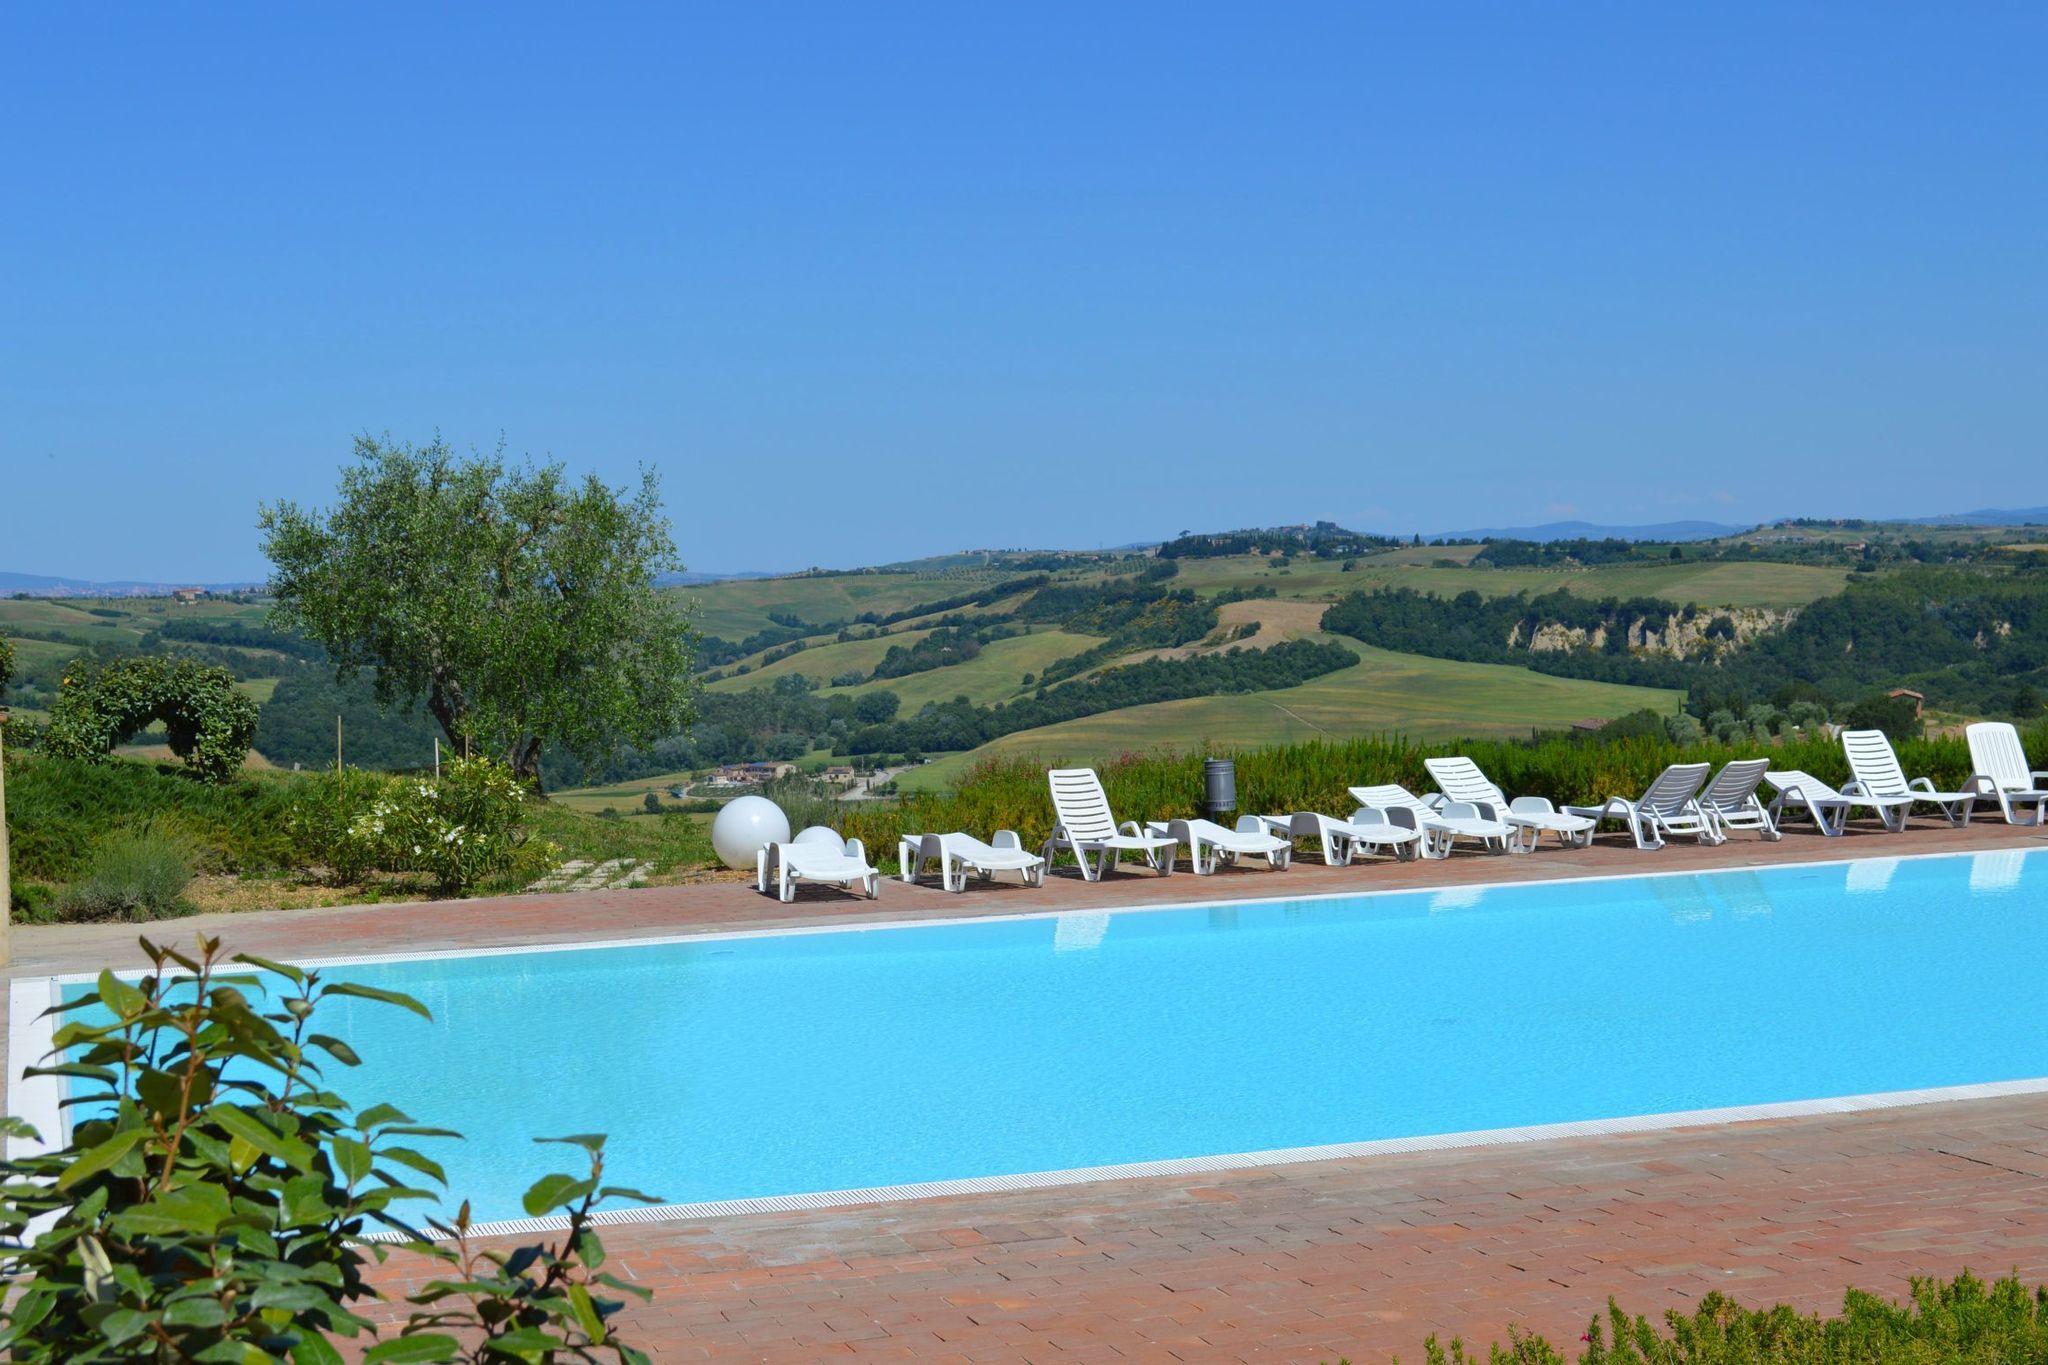 Apartment with 2 pools in the hills of Siena